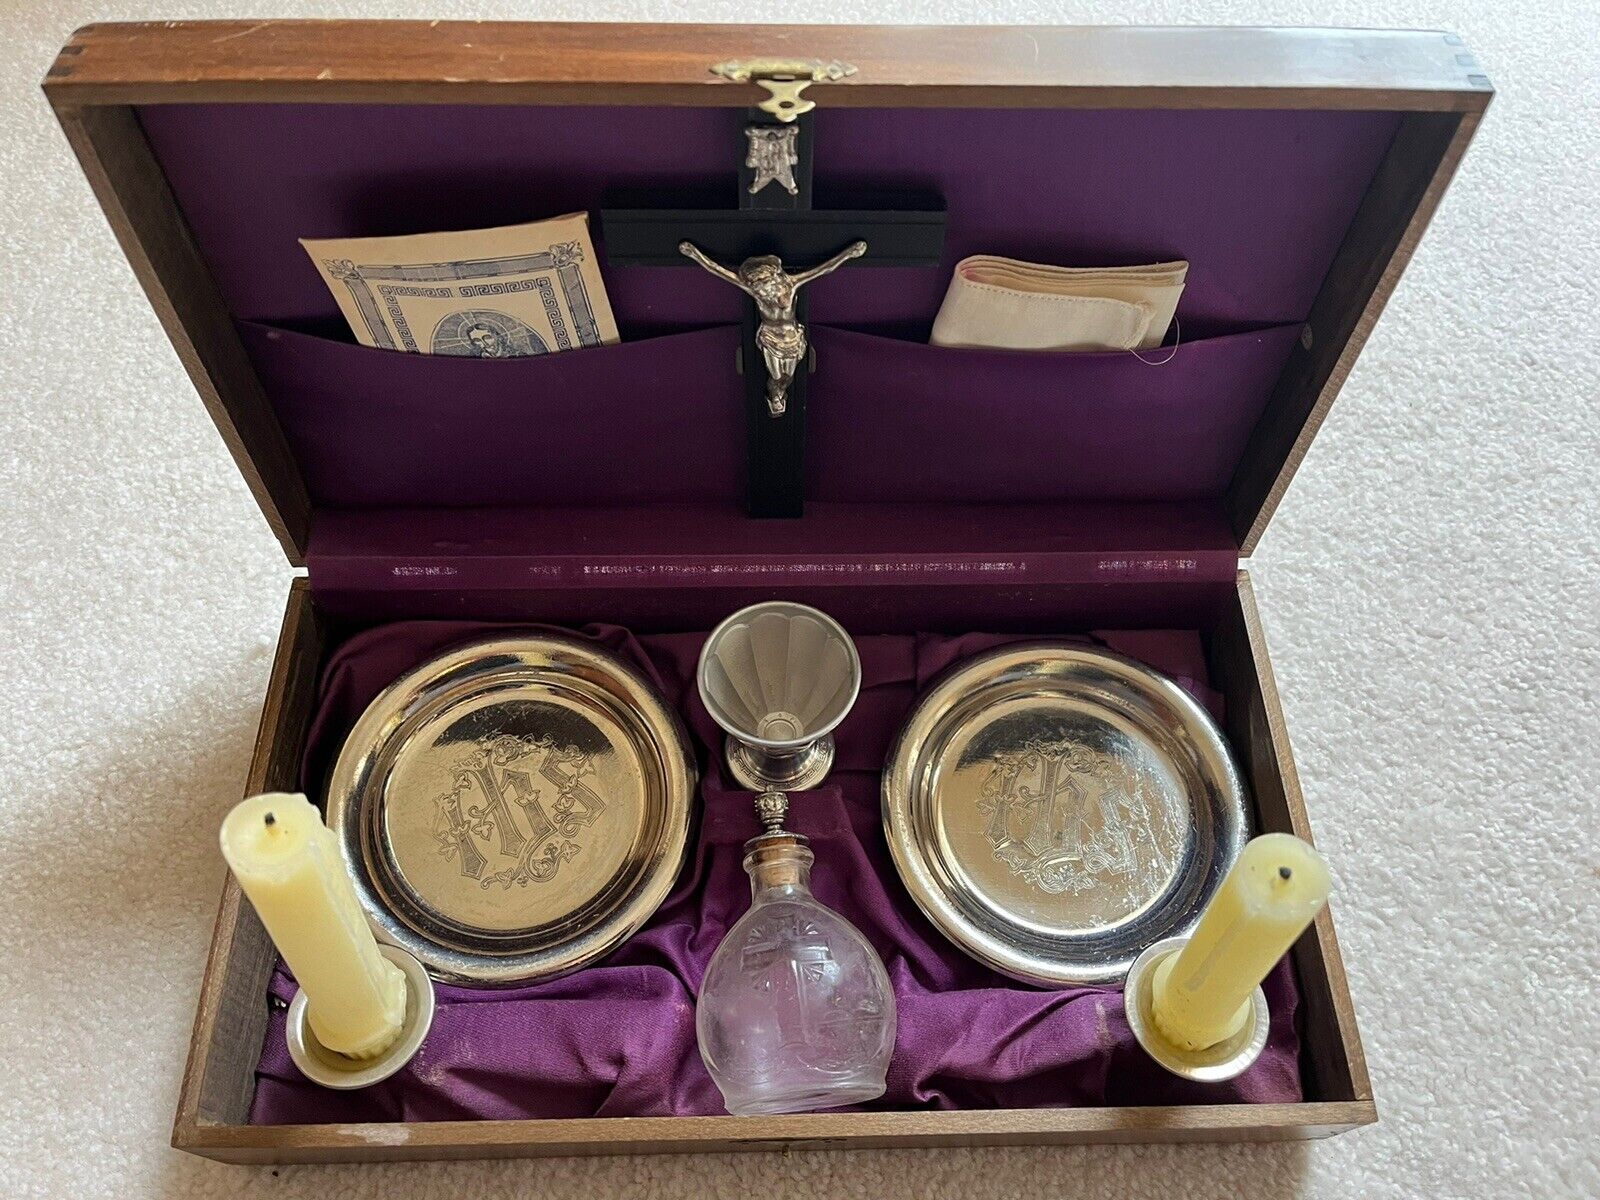 Vintage Catholic Last Rites/Sacrament of the Sick Box and Contents, 1950s